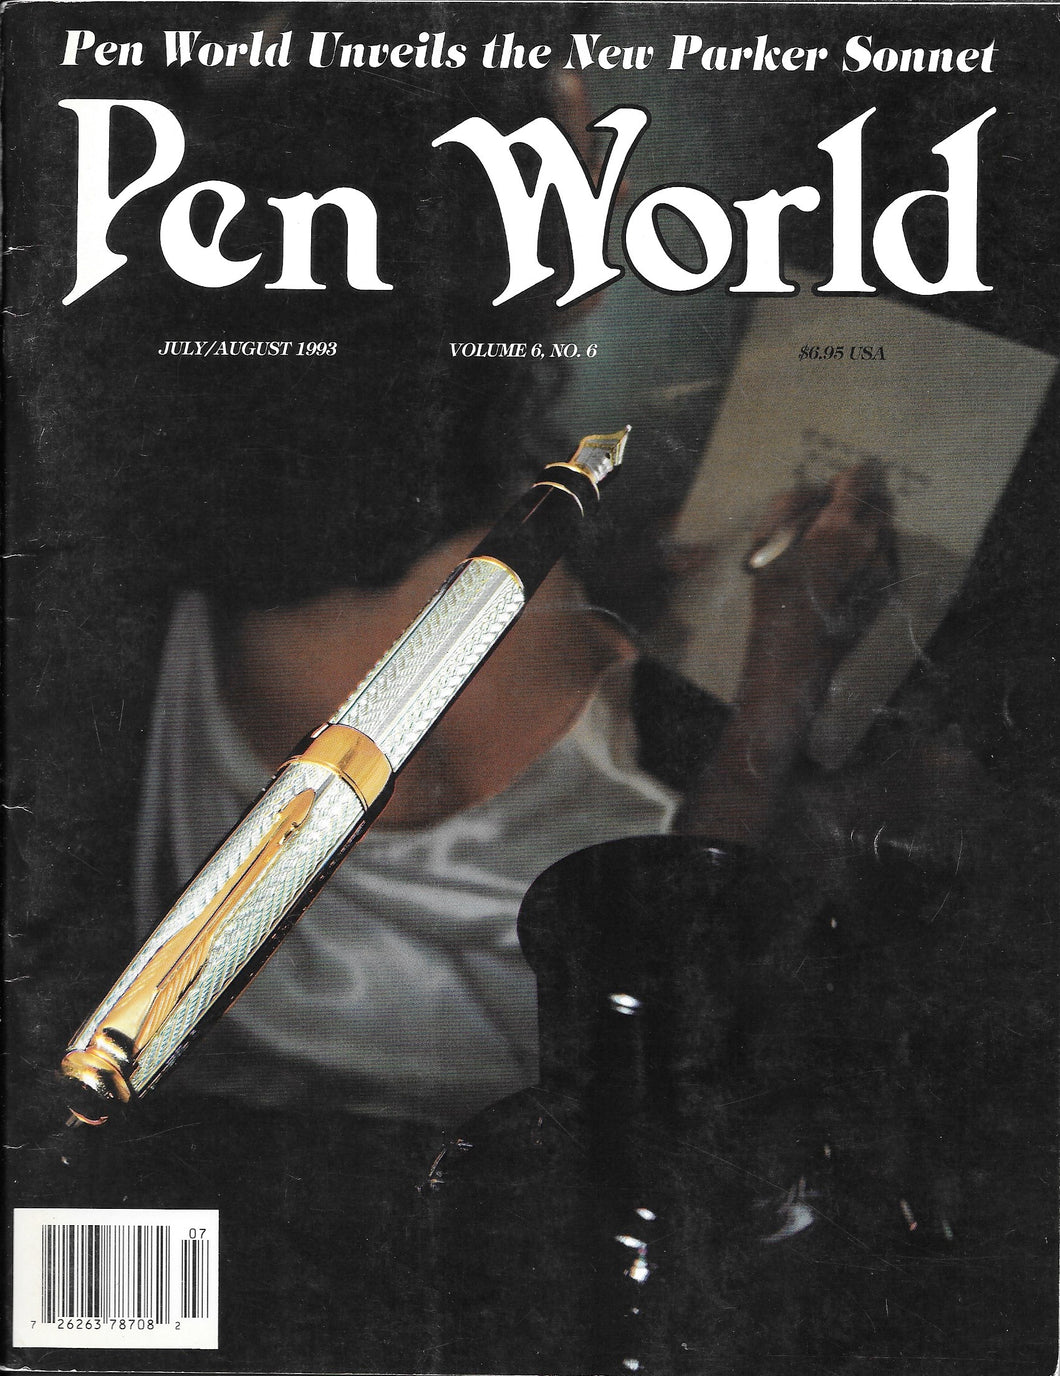 Pen World, Back Issues; July/Aug. 1993 Volume 6, No.6